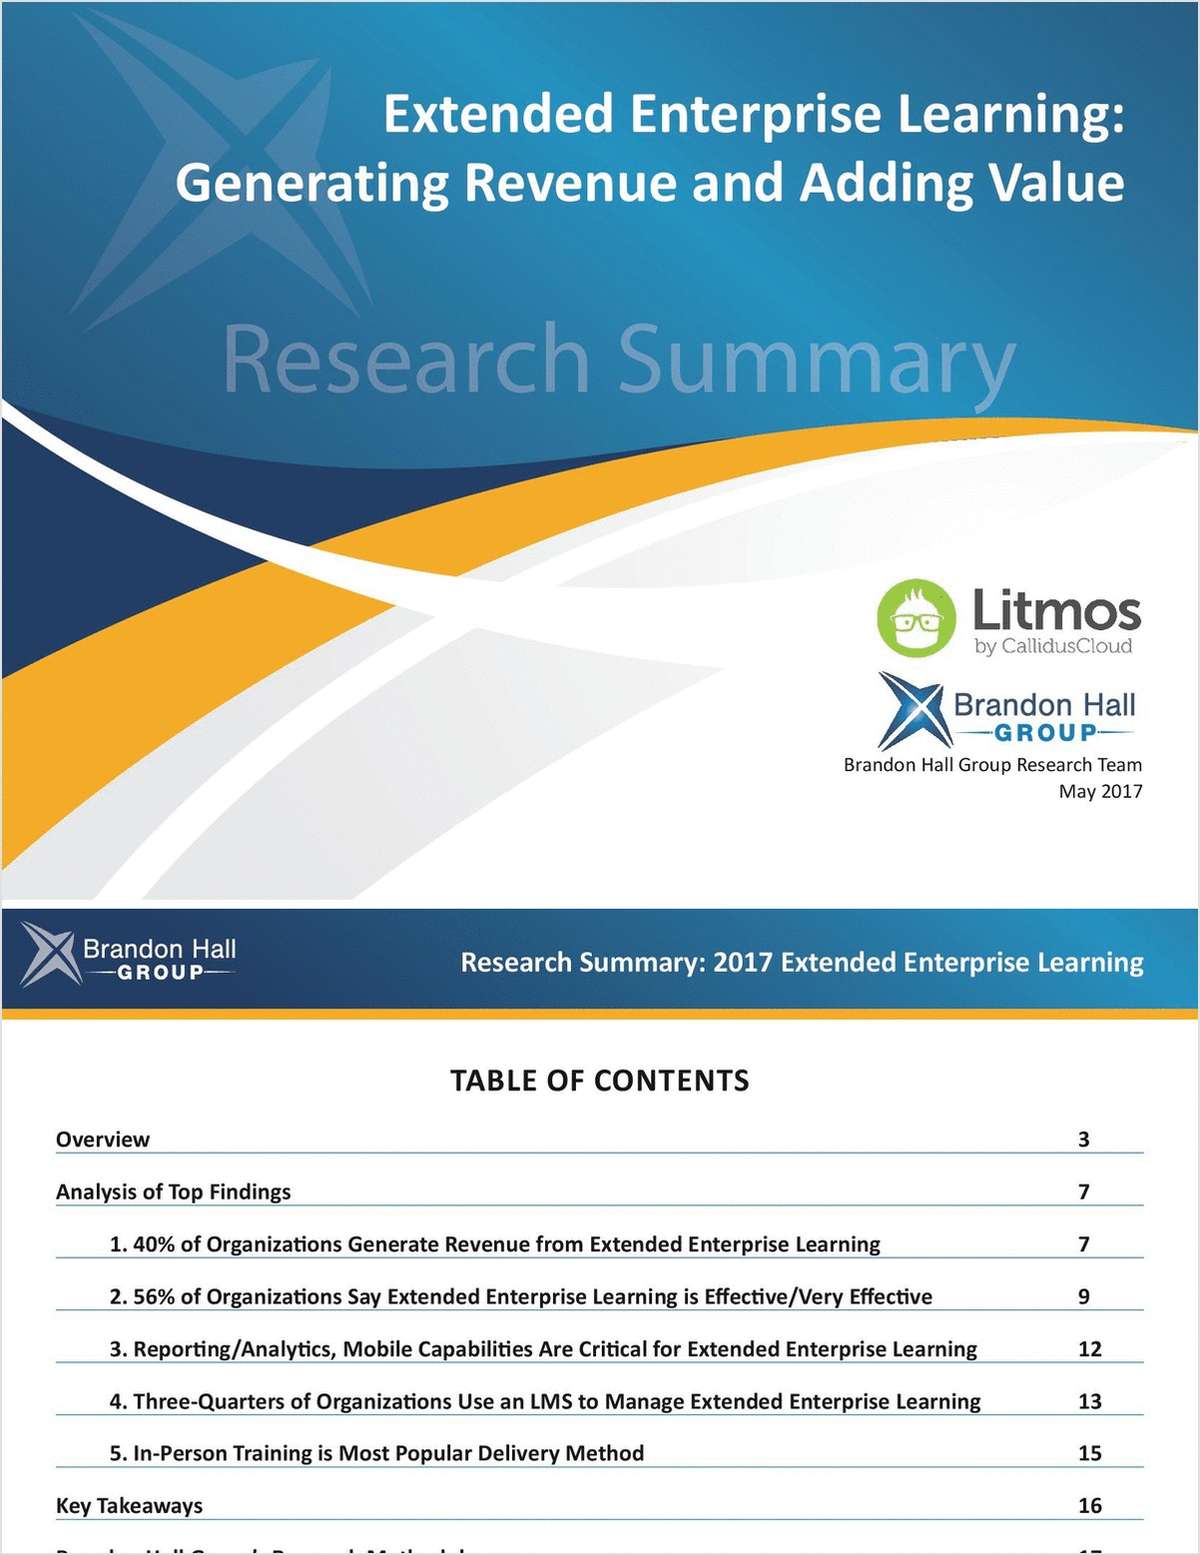 Extended Enterprise Learning: Generating Revenue and Adding Value